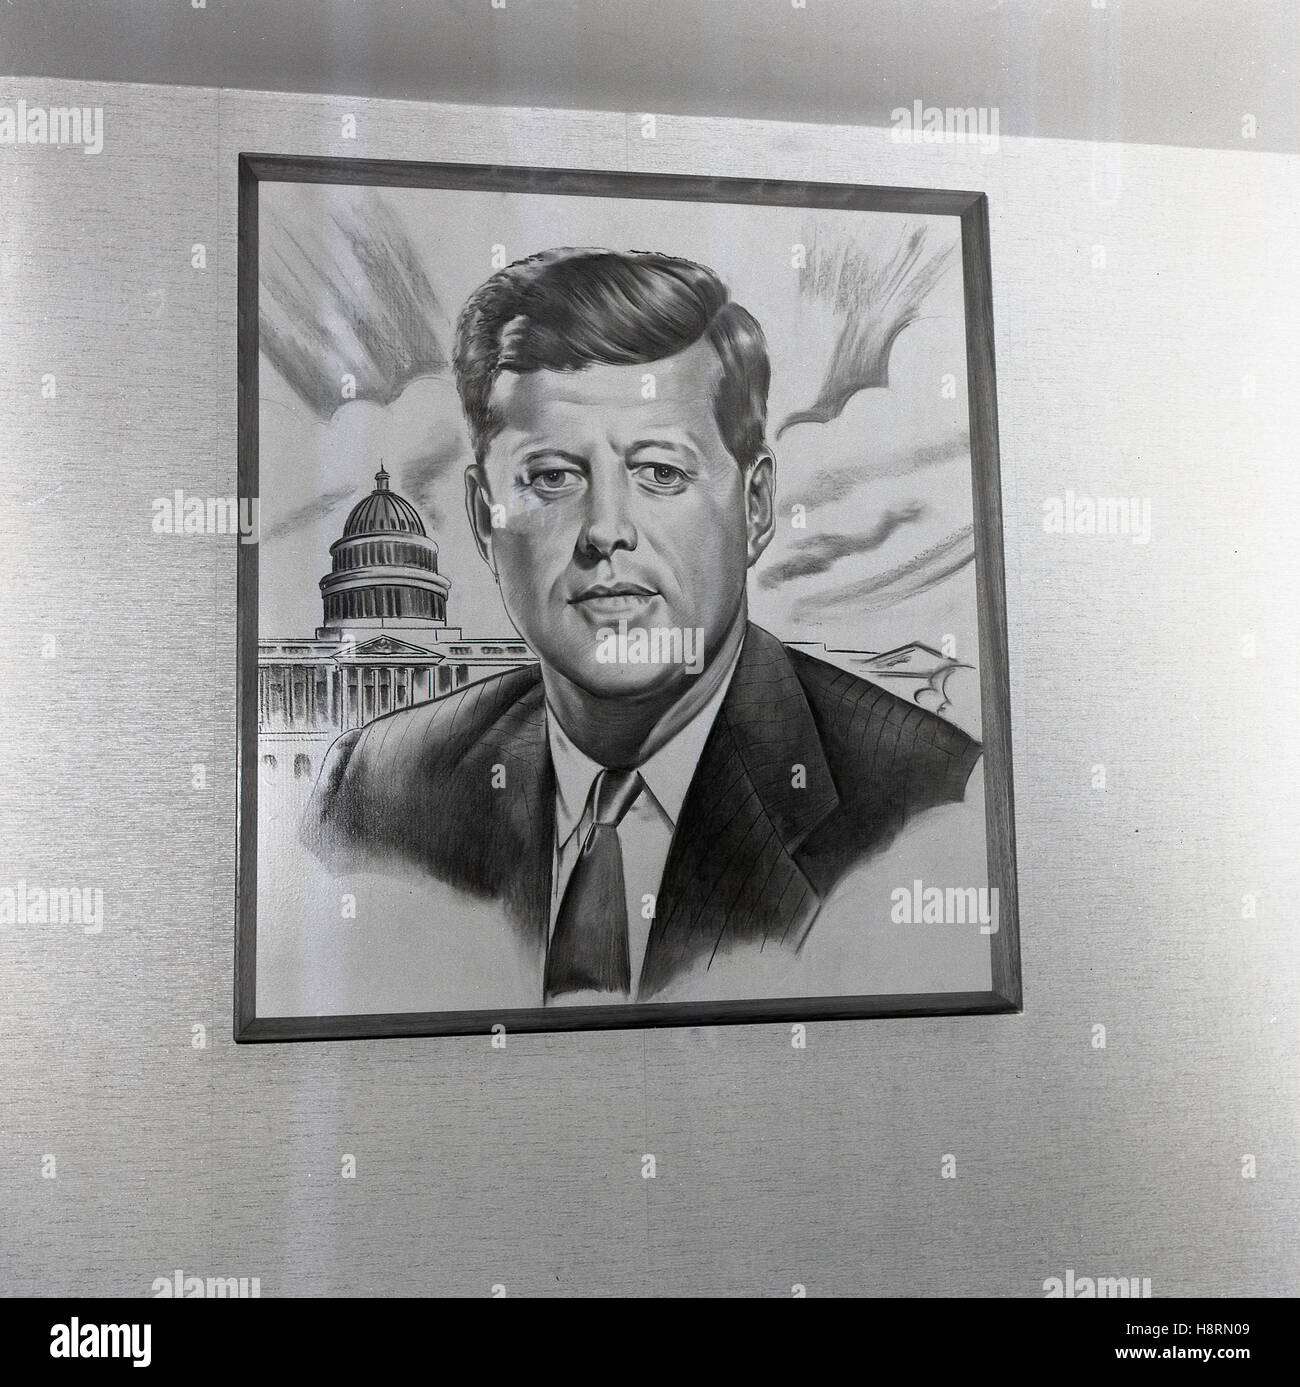 1965, historical, a pencil drawing of the 35th American President, John F. Kennedy in front of the Capitol, the meeting place for the USA Congress. The artwork was on the wall of an English pub named after the President. Stock Photo